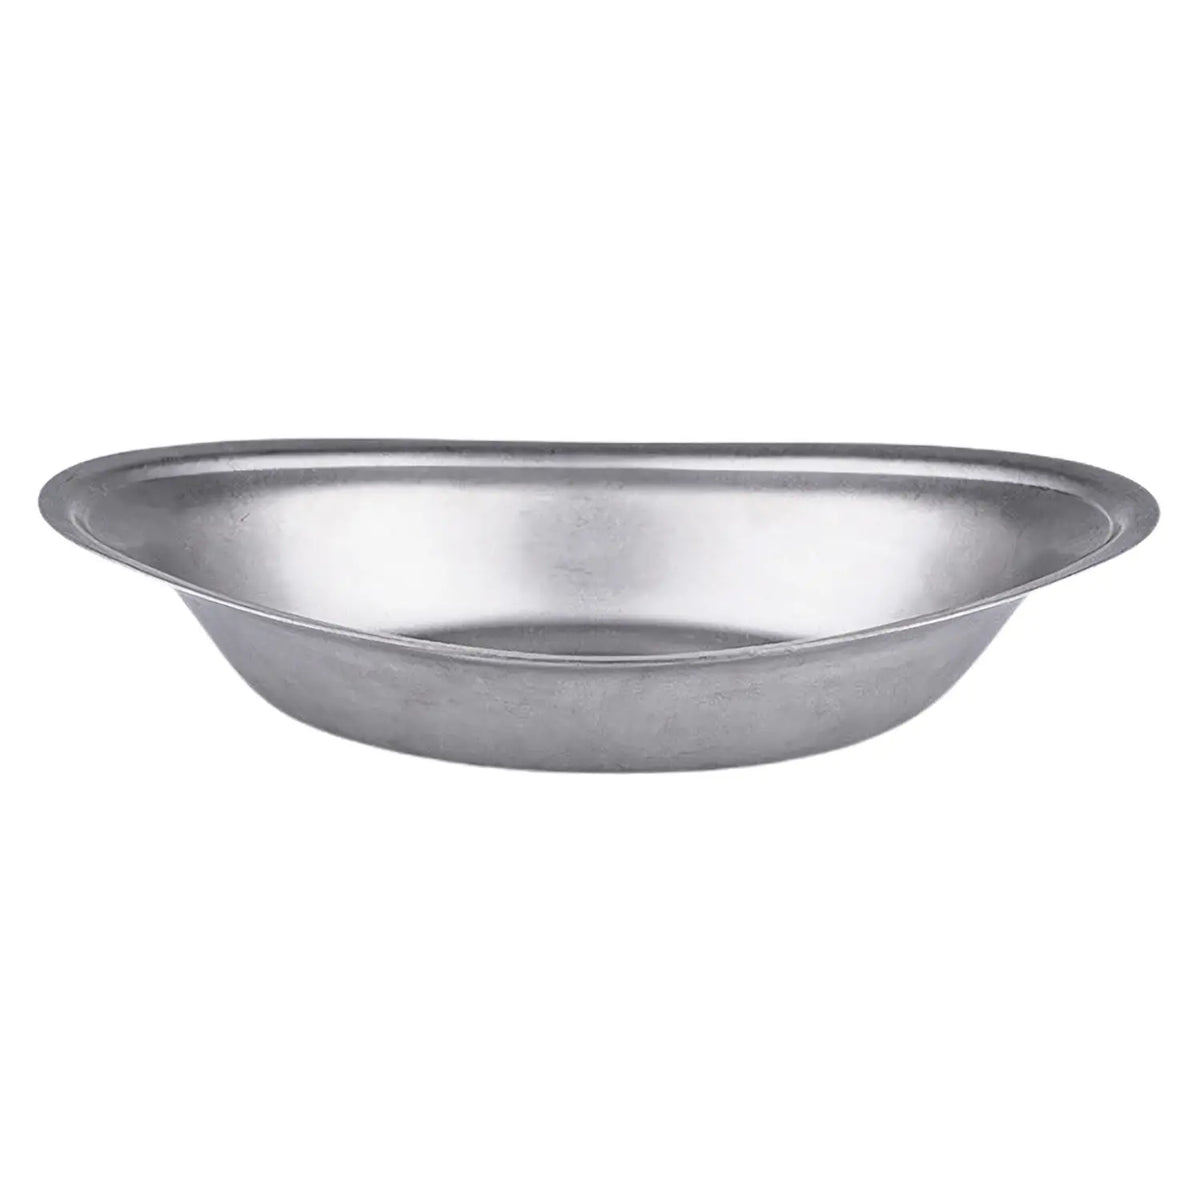 AOYOSHI VINTAGE Stainless Steel Small Curry Plate